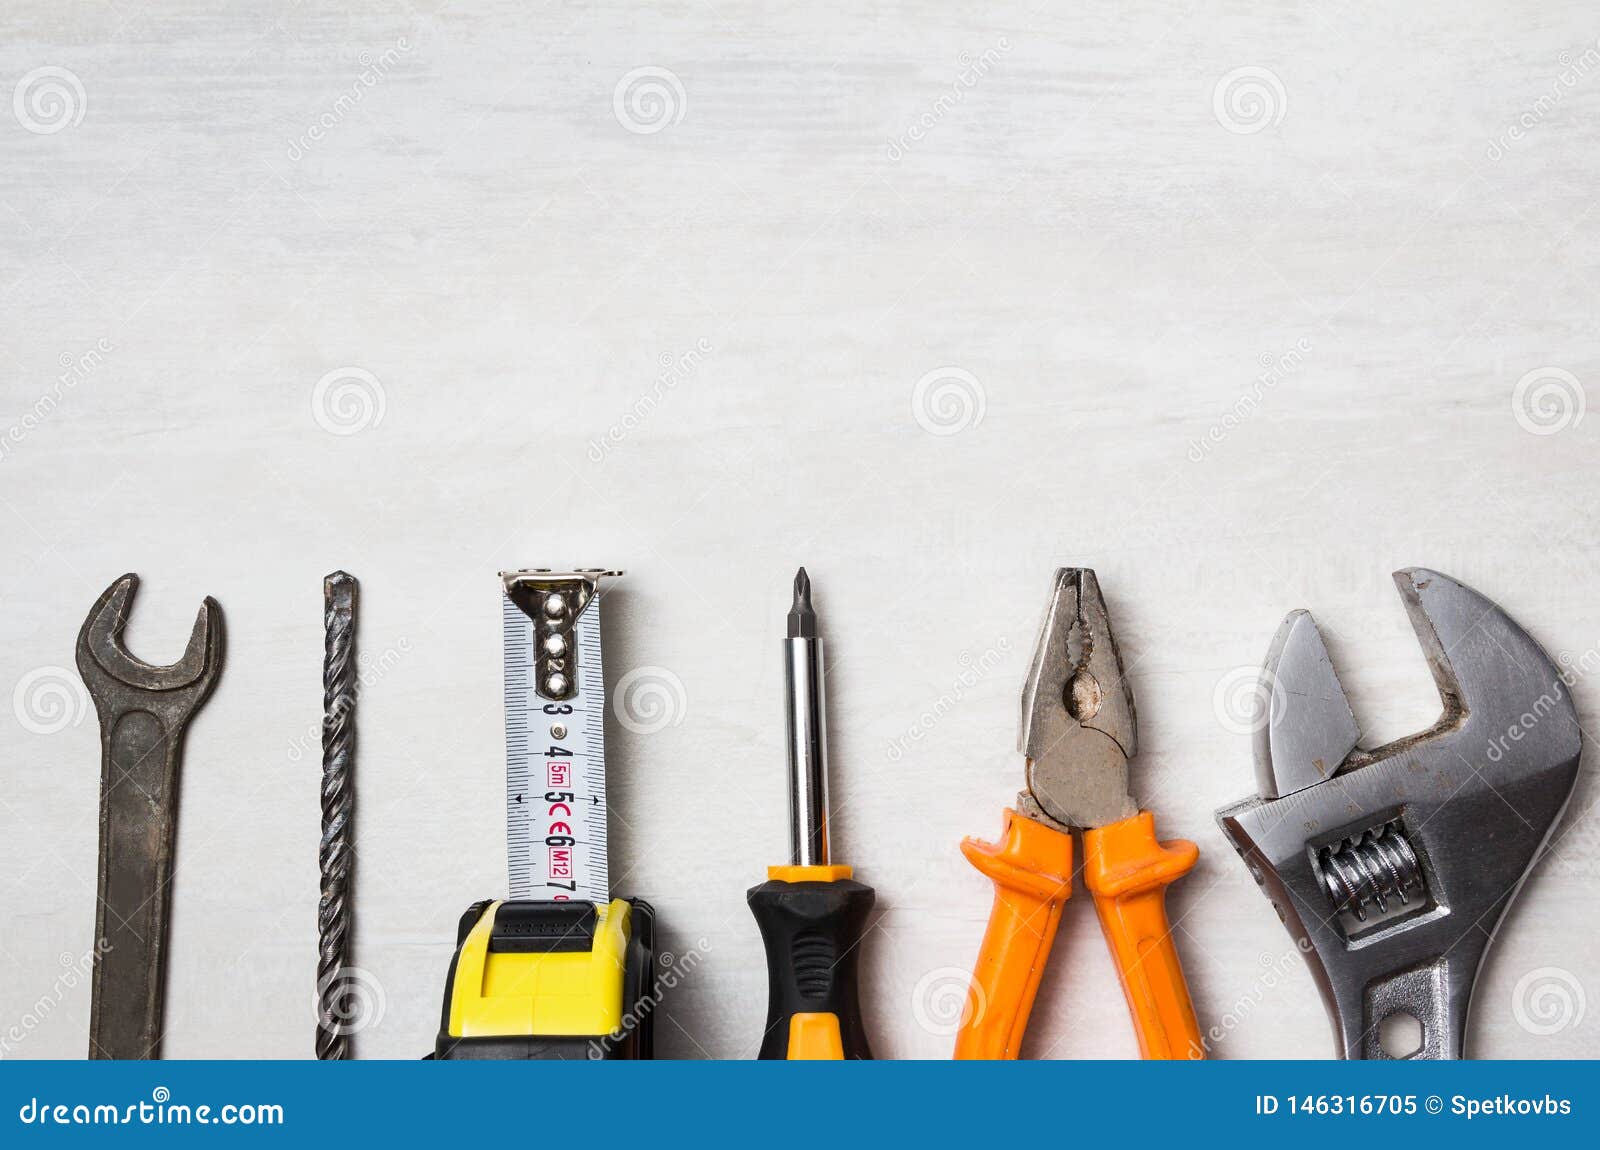 Hardware Border, on a Desk Stock Image - Image of repair, industrial: 146316705